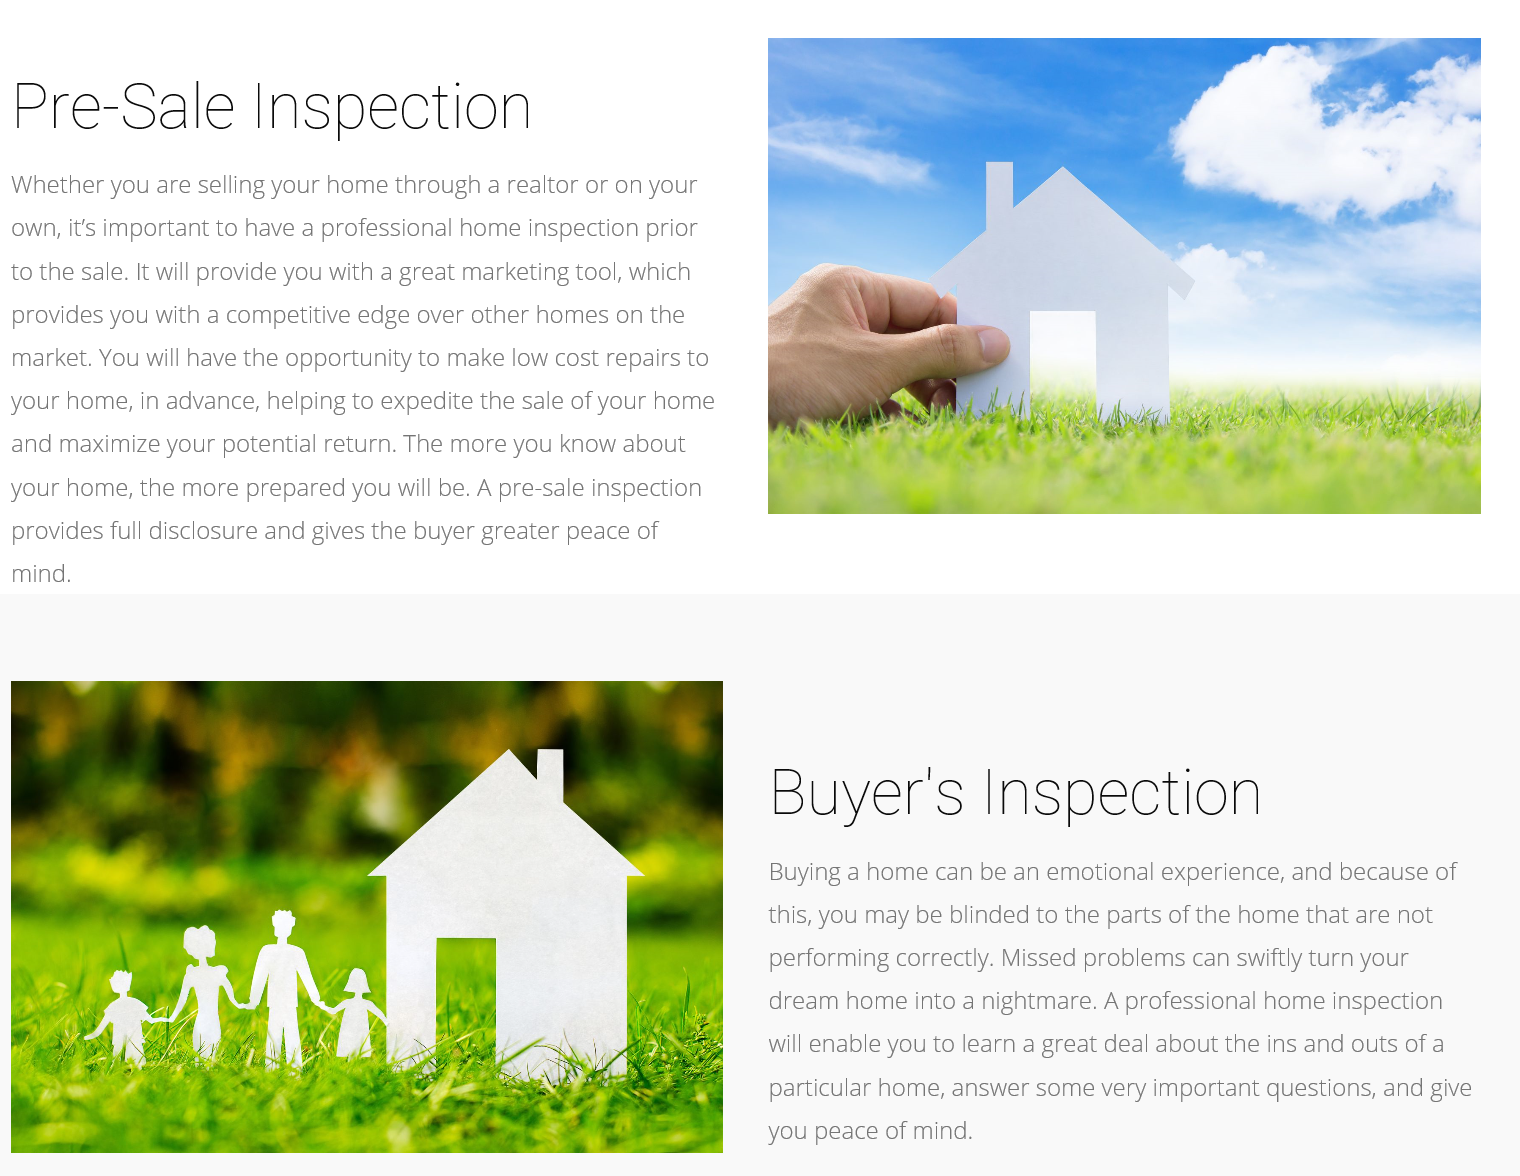 Pre-Sale Inspection and Buyer's Inspection images with descriptive text.